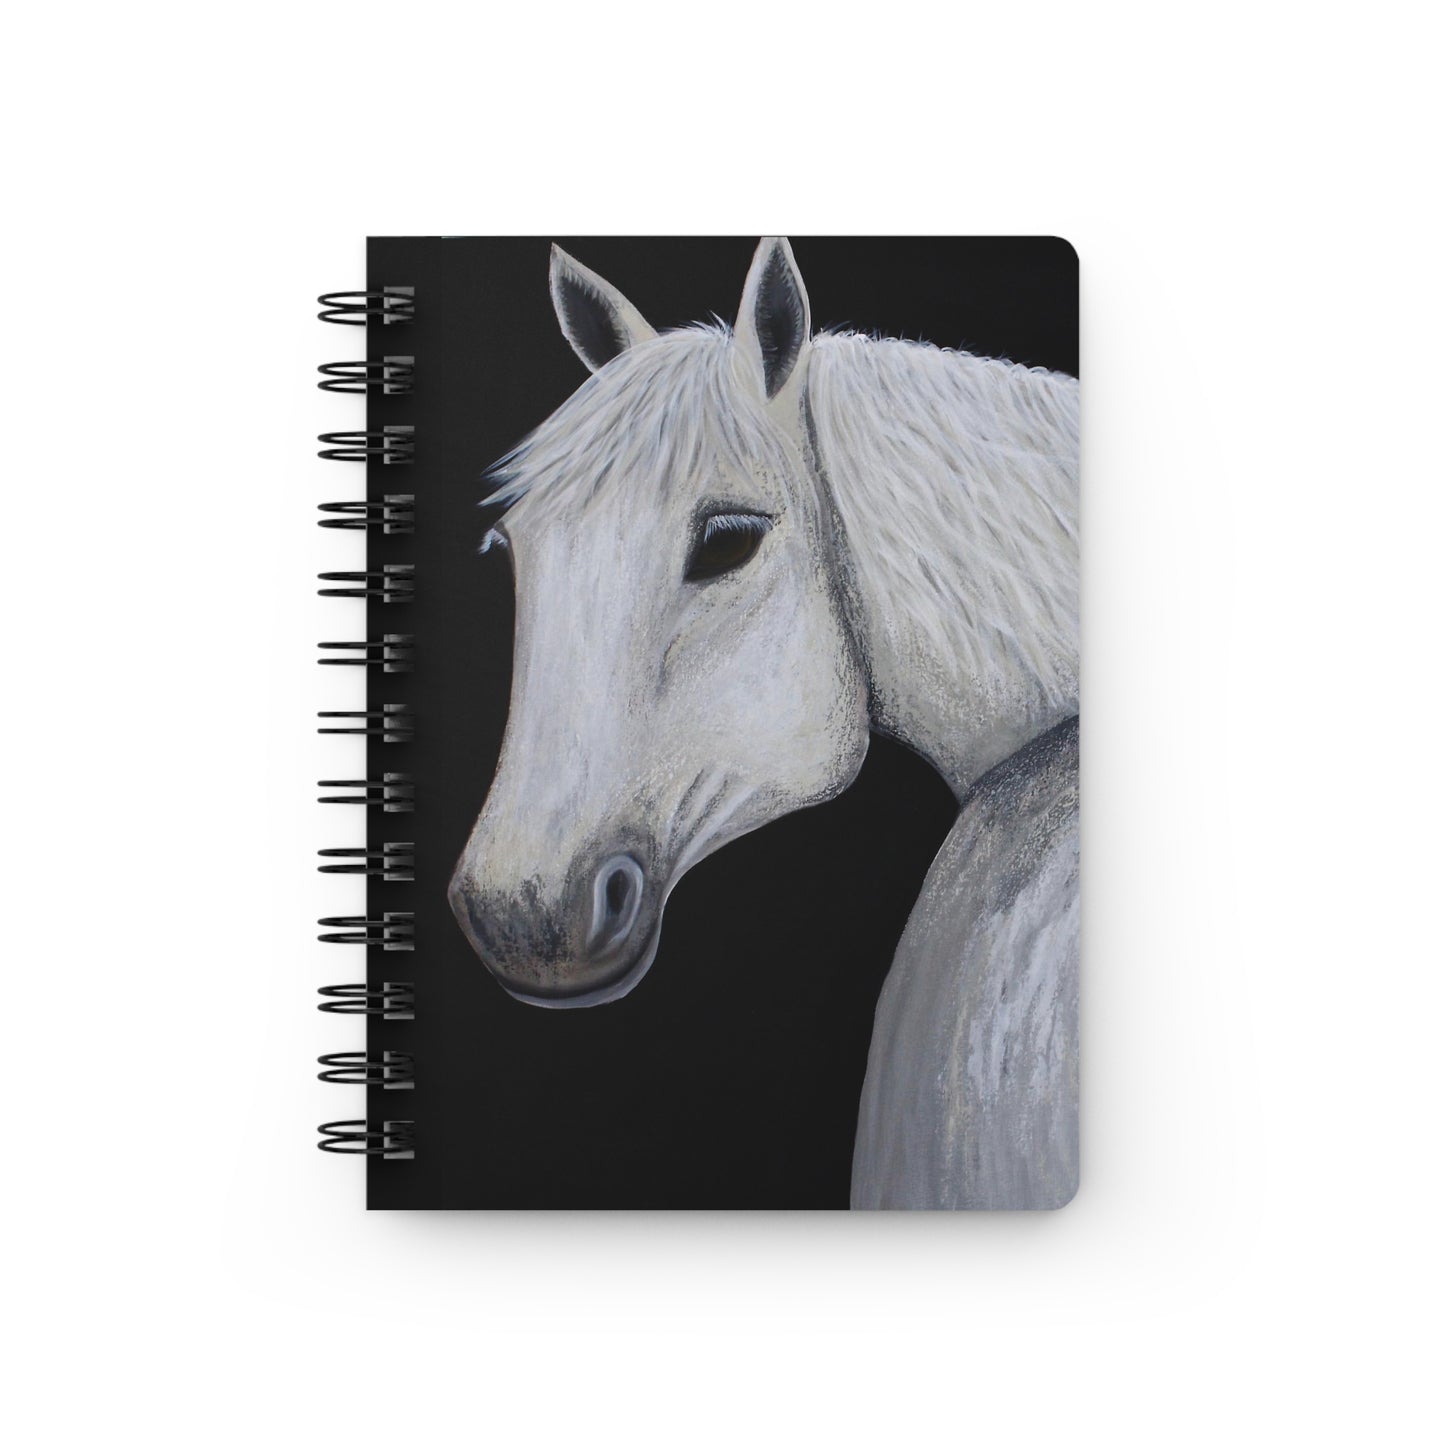 Spiral Bound Journal - Journal - Equestrian Note pad - Note pad - Ghost